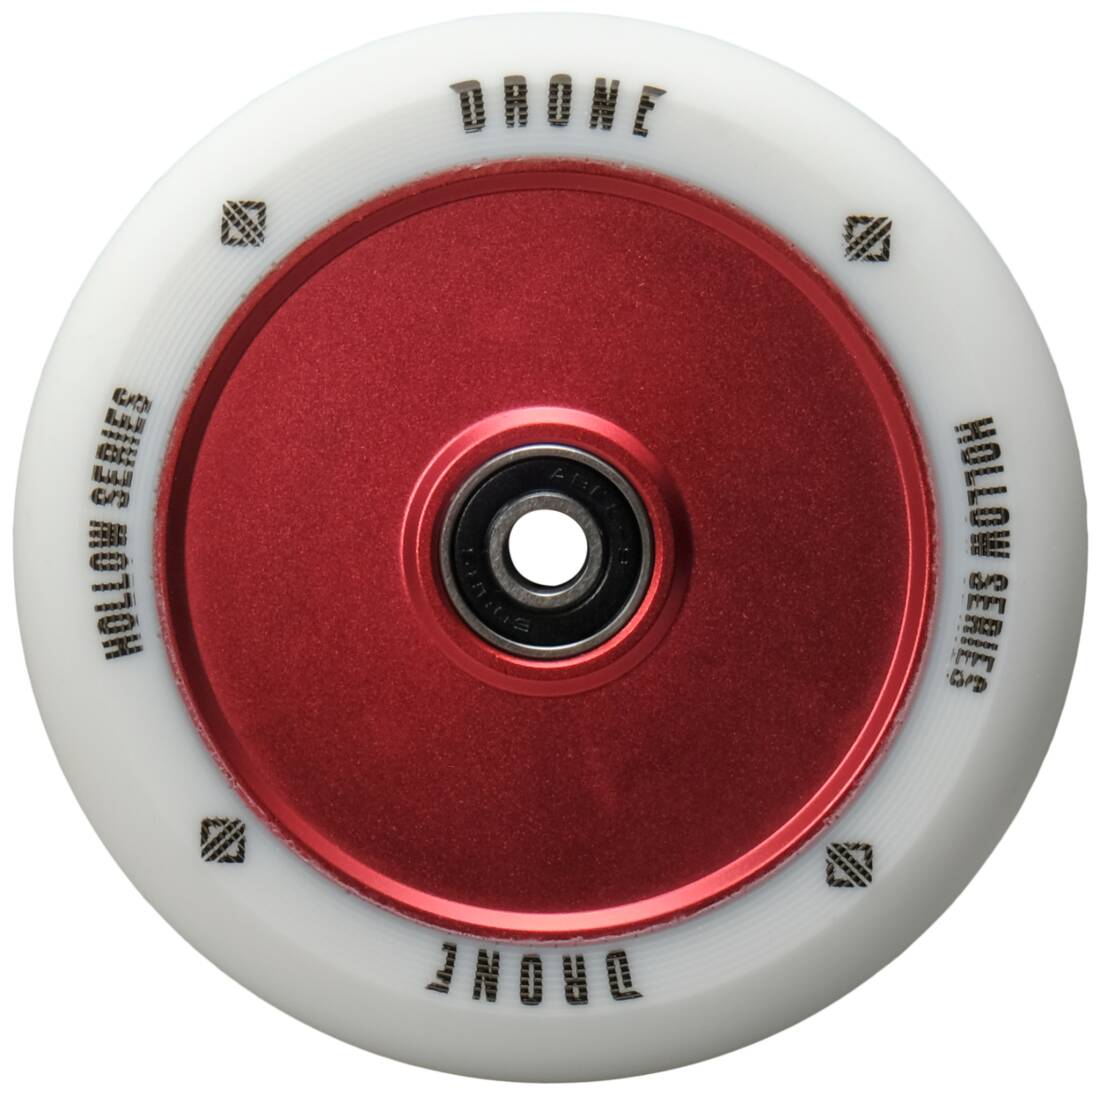 Drone Hollow Series Pro Scooter Wheel - SeasideBMX - Drone